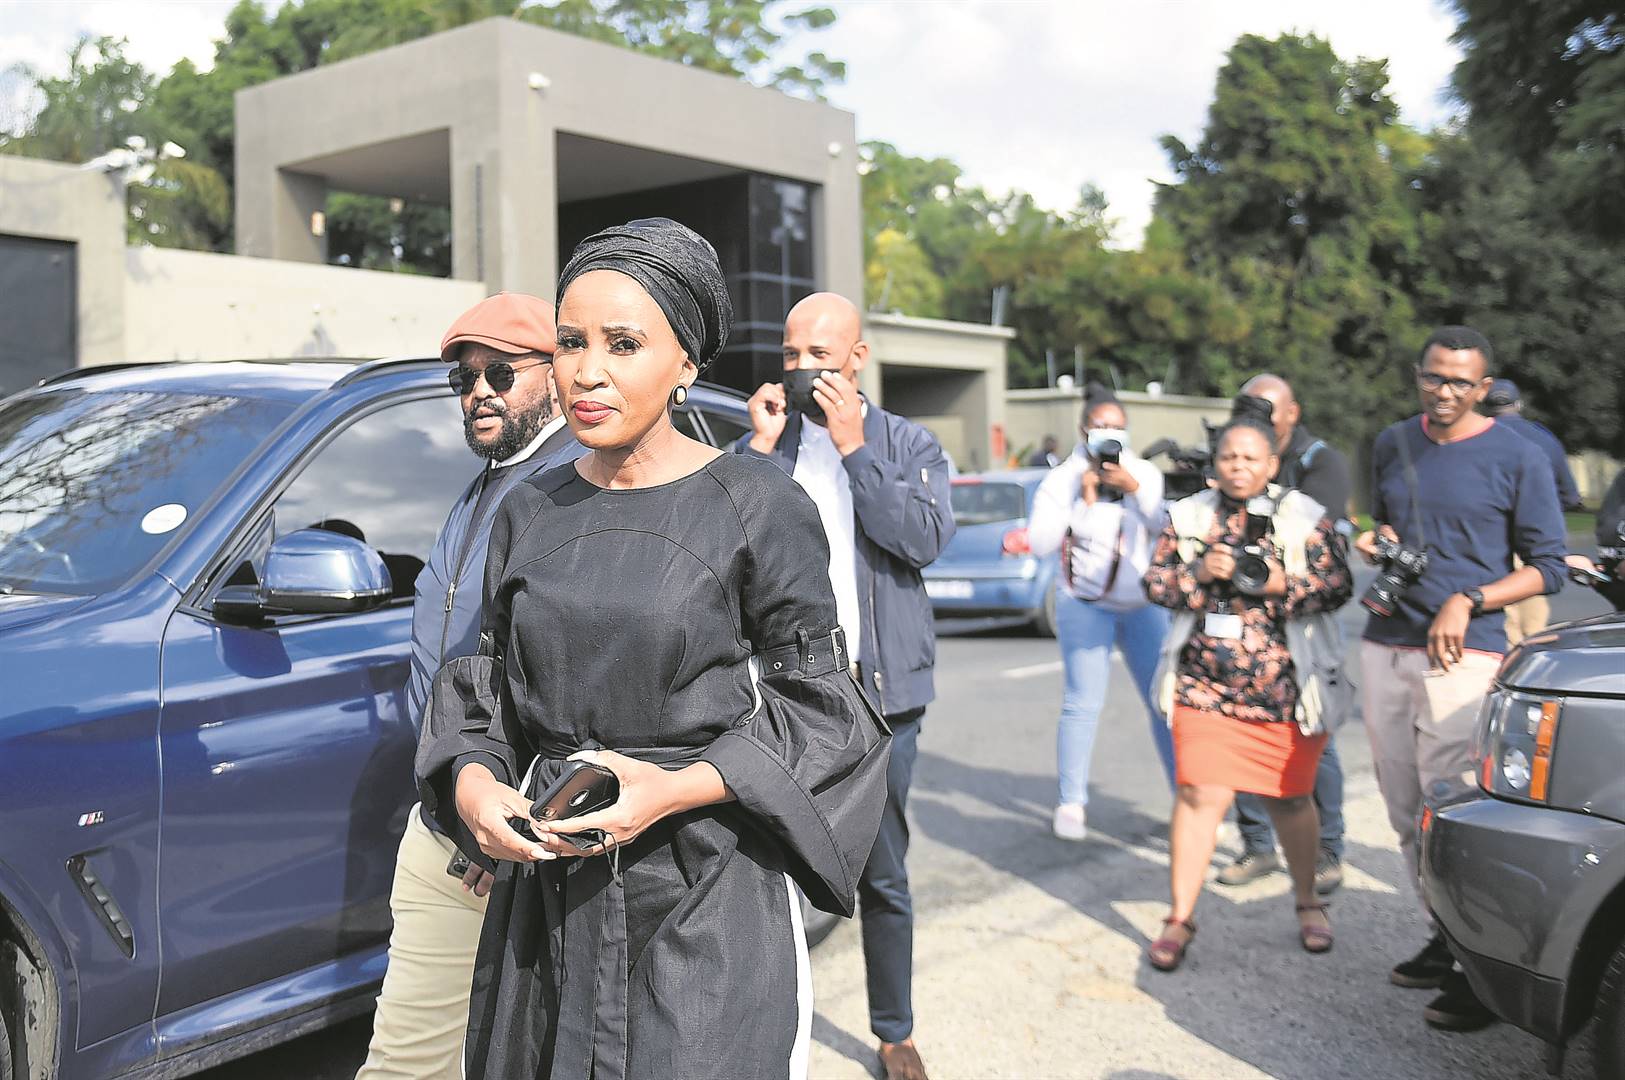 Mayor Mpho Phalatse was among the leaders who visited the late Mpho Moerane’s family yesterday to convey their condolences, where spokesman Mike Maile (inset) provided details for both the memorial service and funeral.             Photos by Christopher Moagi